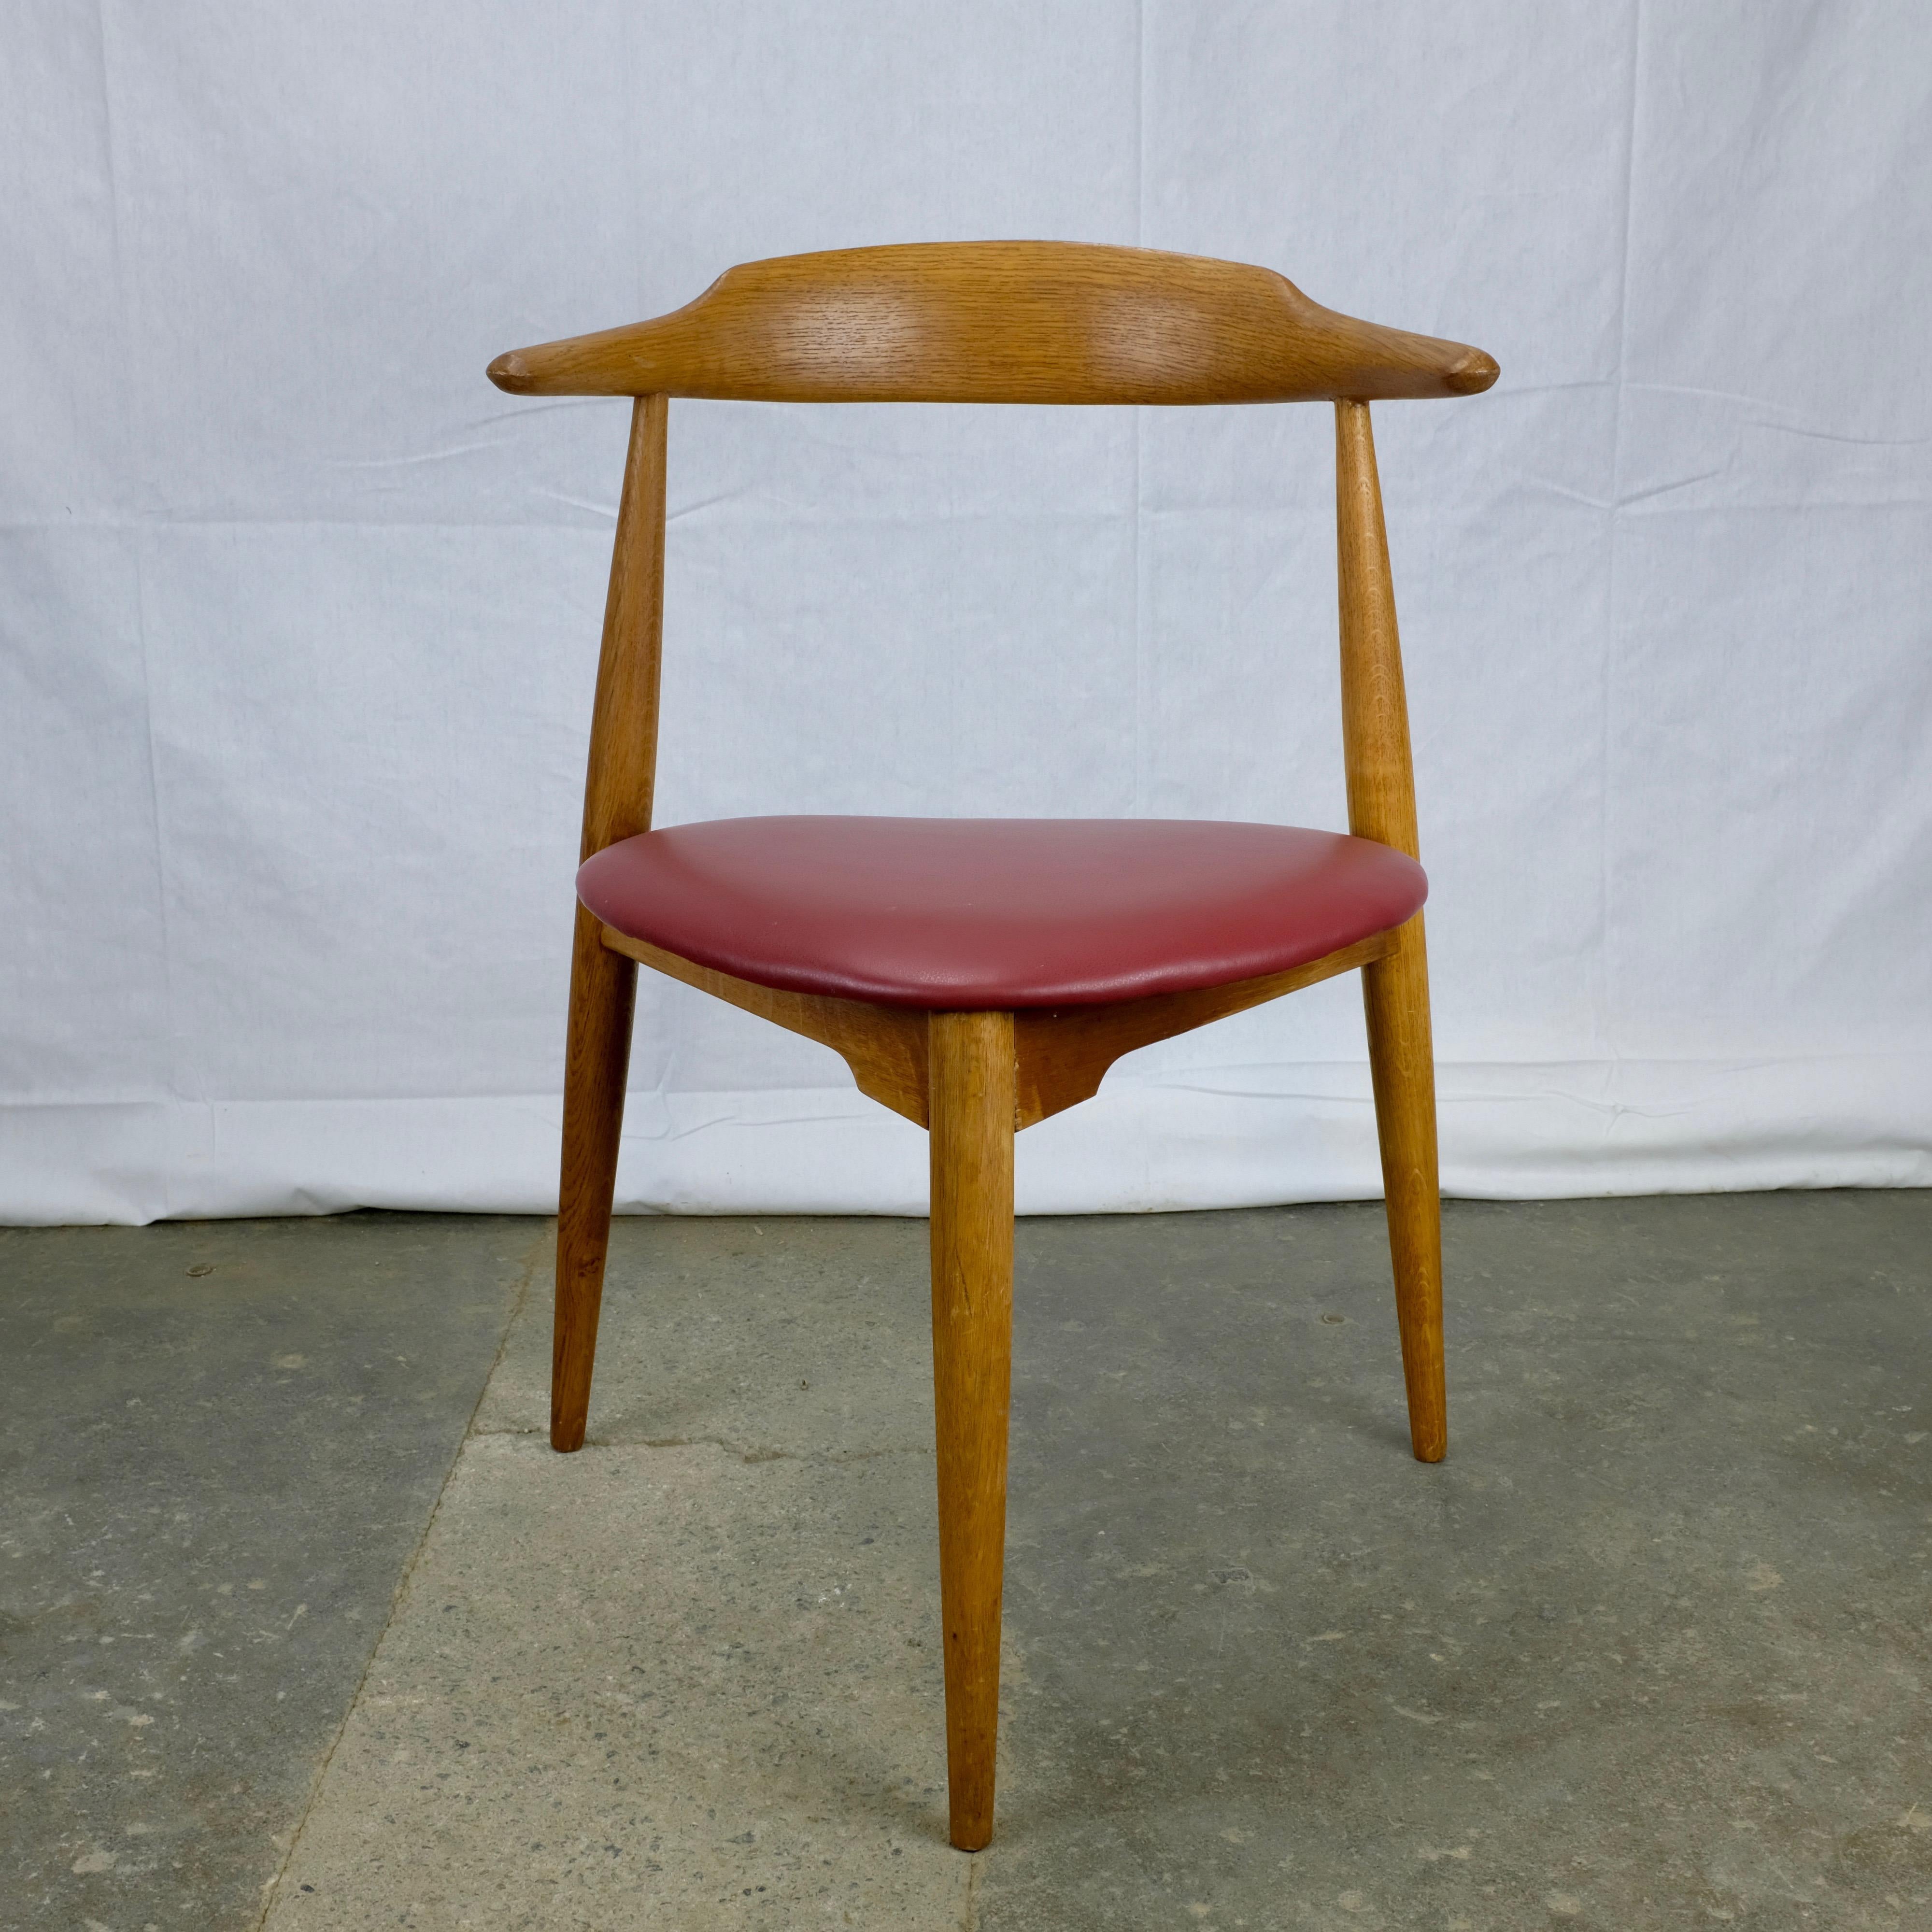 Three-legged dining chair designed by Hans Wegner in 1953 and made in Denmark by Fritz Hansen. Known as the 'heart chair' for the shape of its seat.

Frame constructed in oak with red leatherette seat. Stamped with 'FH' and 'Denmark' across the